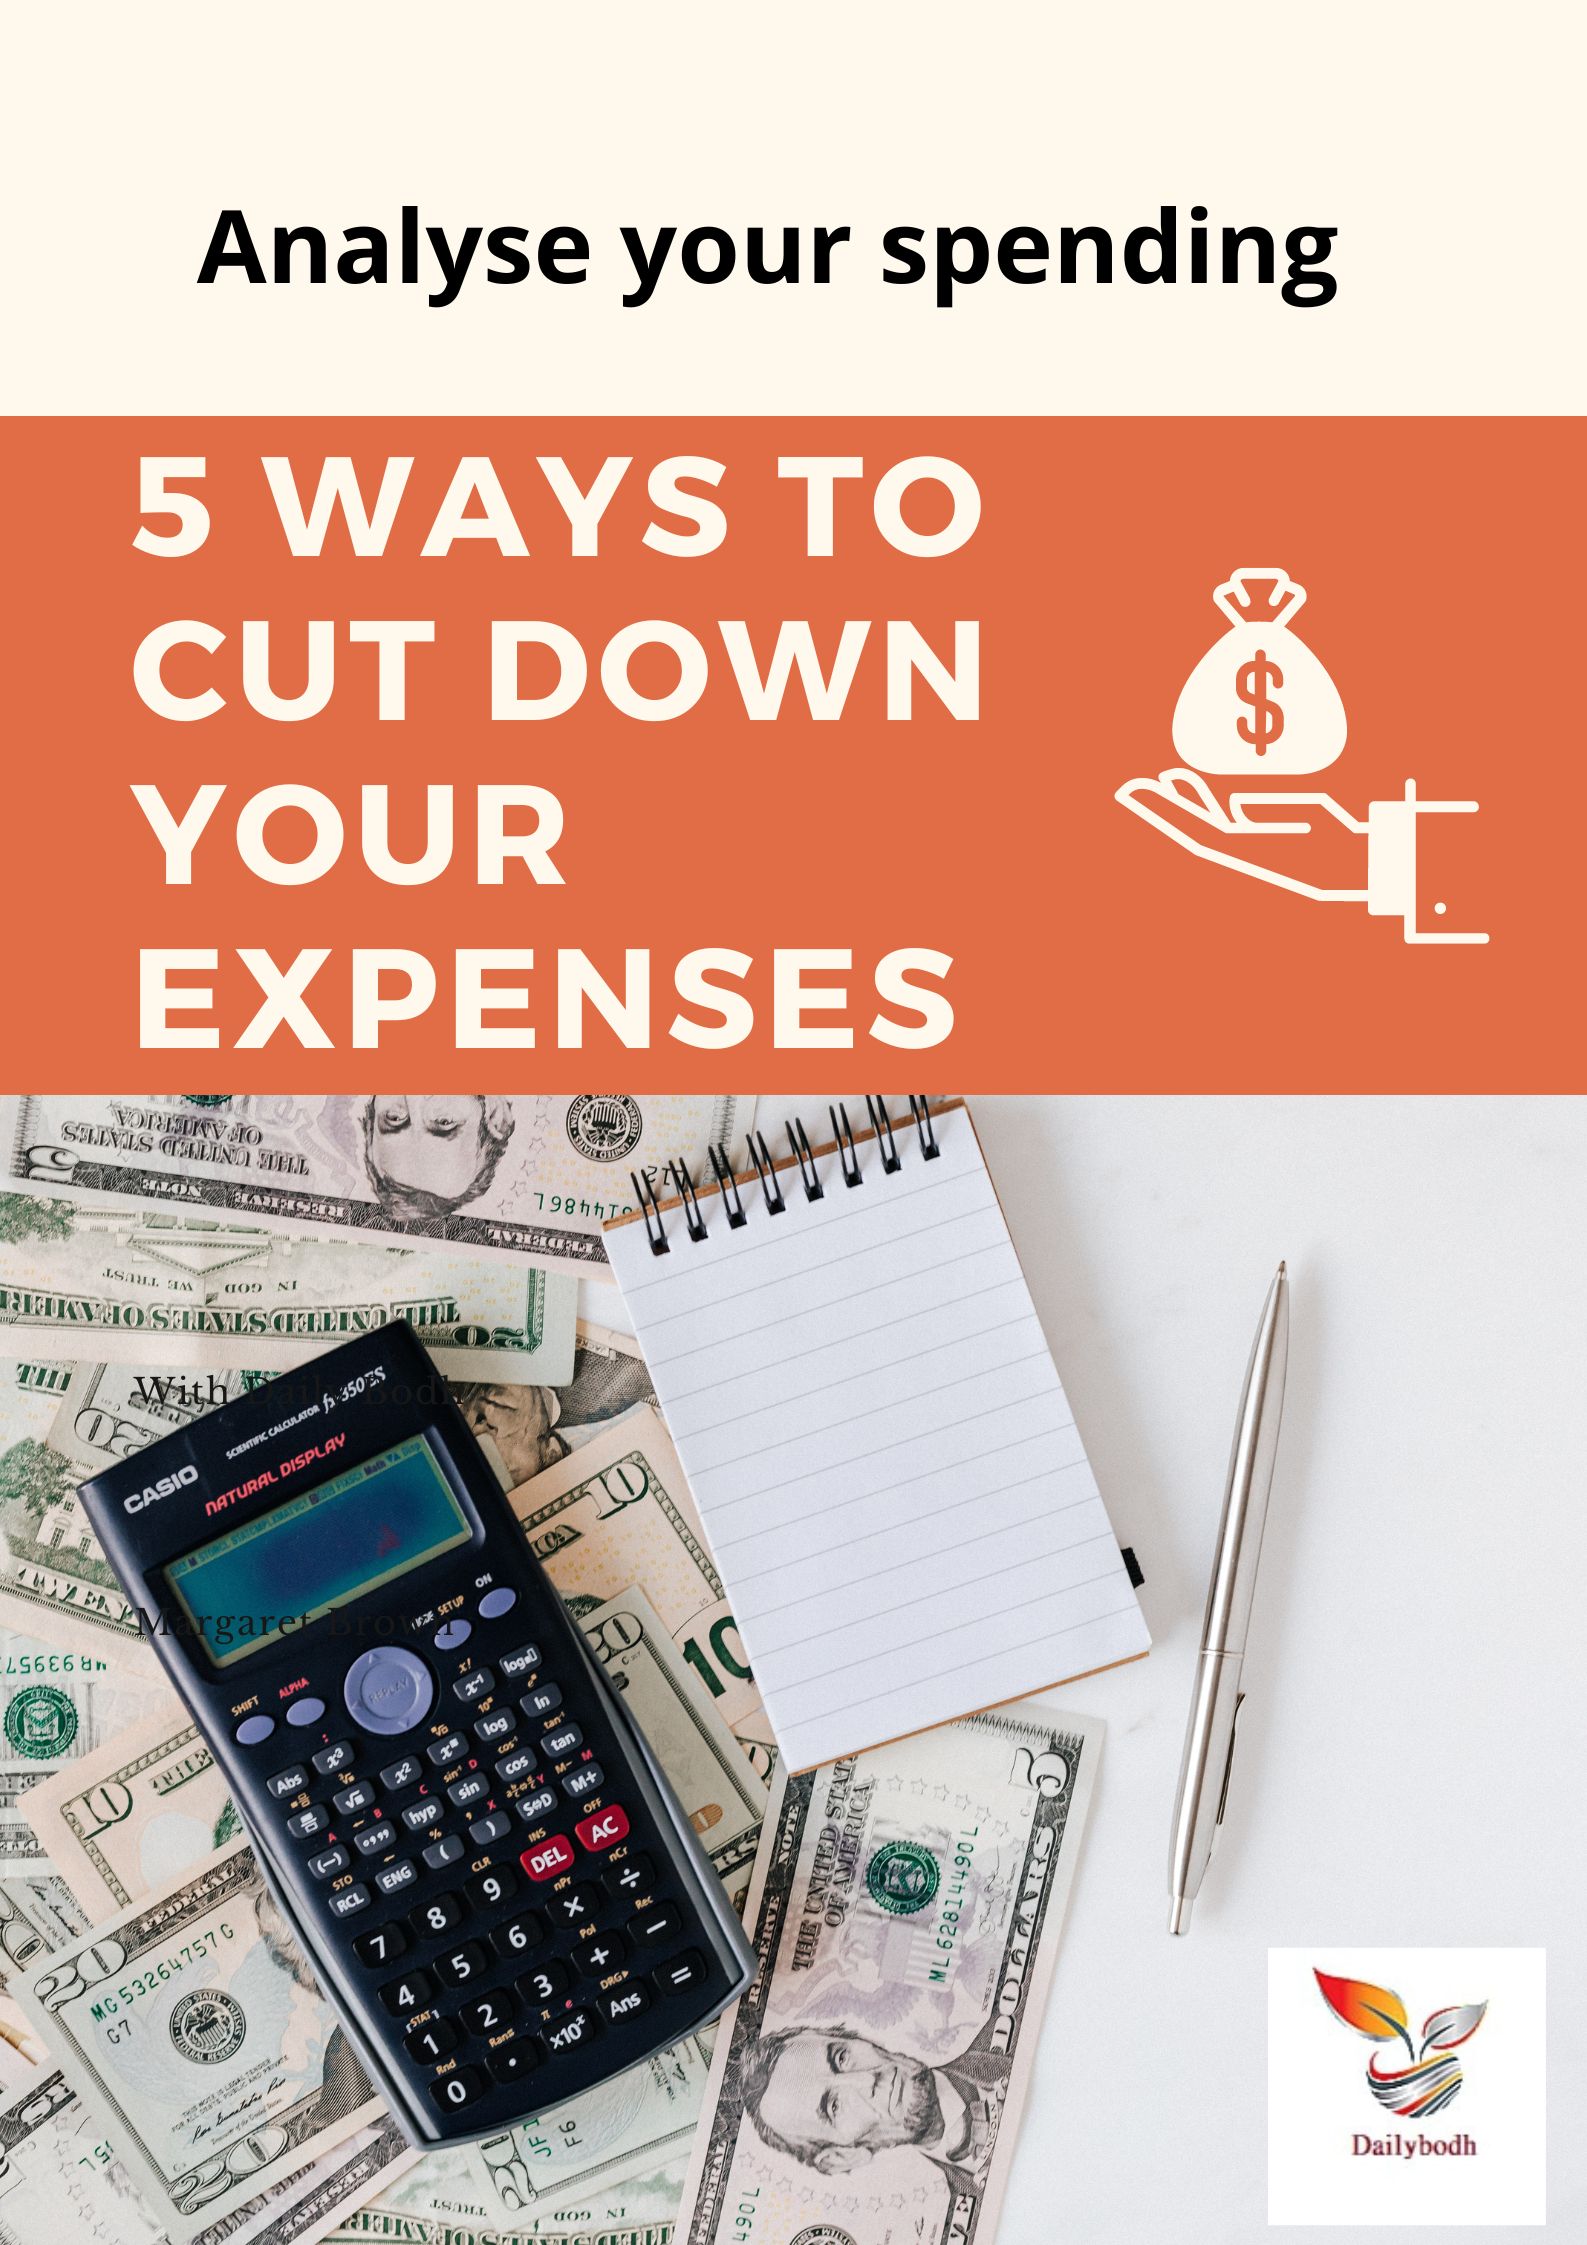 Analyze your spending (5 Ways to cut down your expenses)